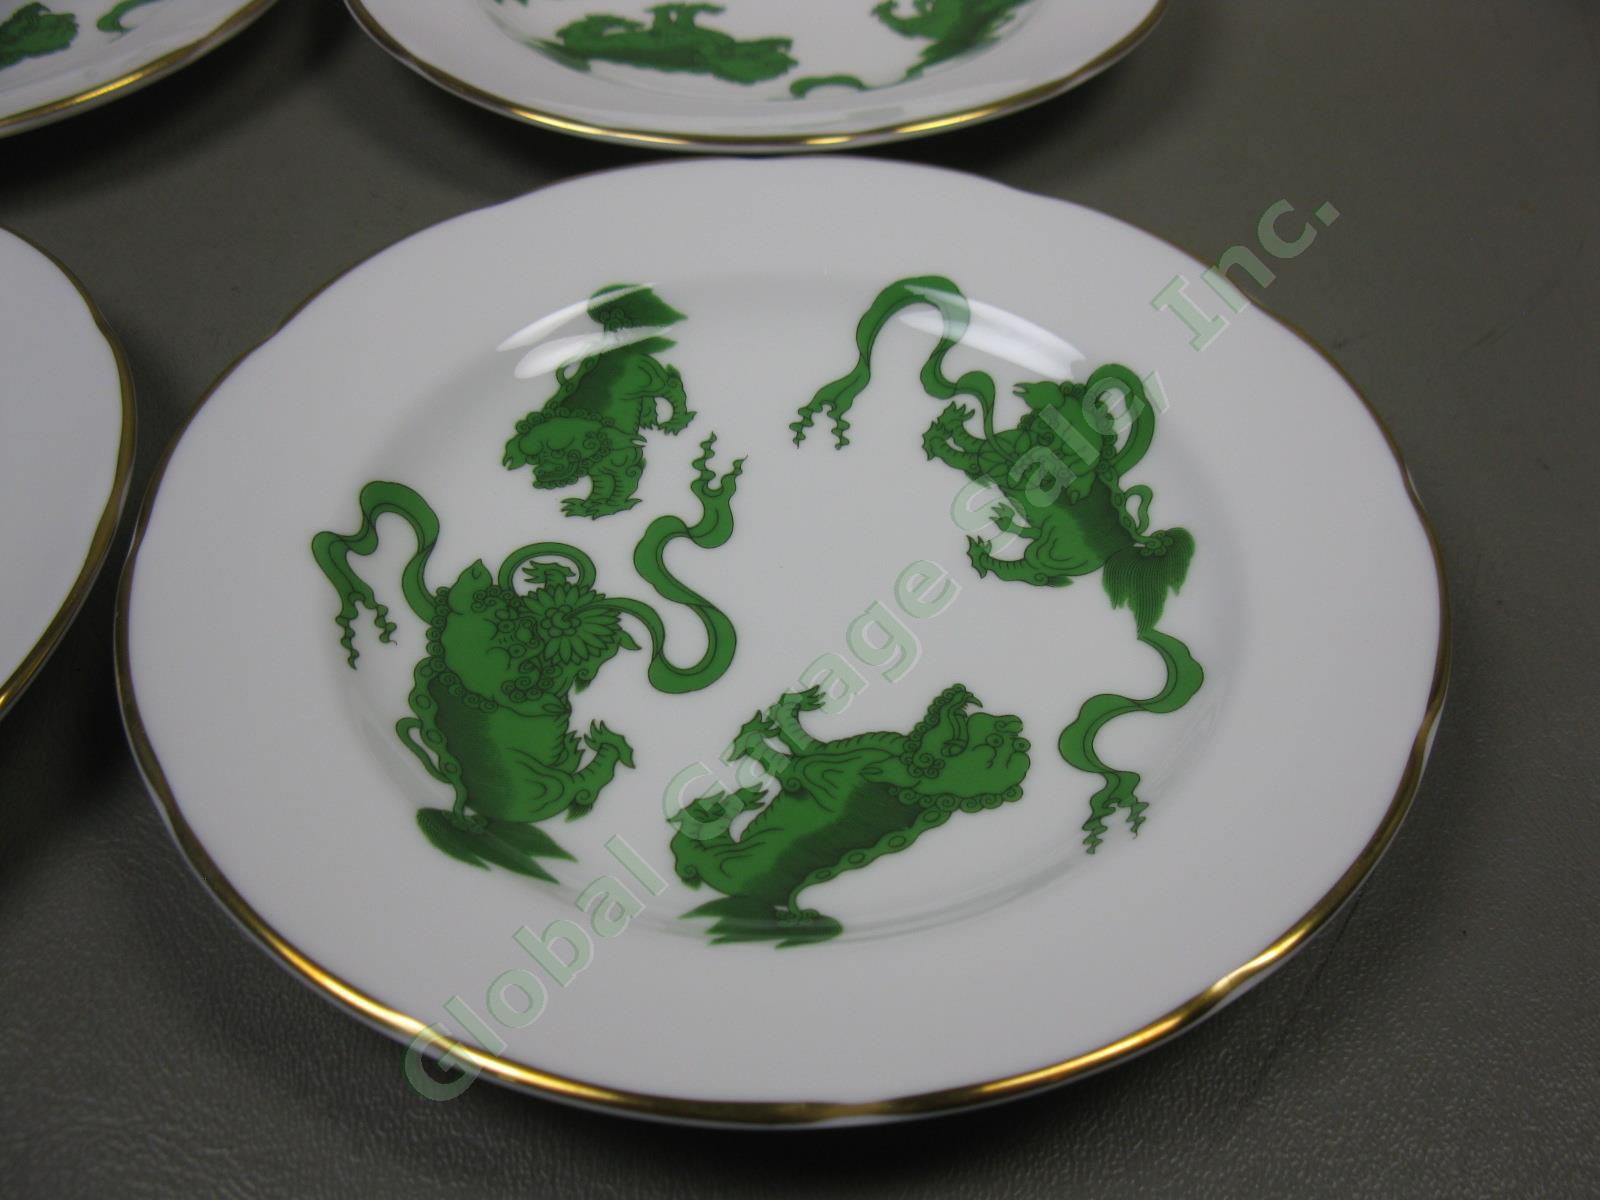 4 Wedgwood England Bone China Chinese Tigers Green 6" Bread Butter Plate Set Lot 1